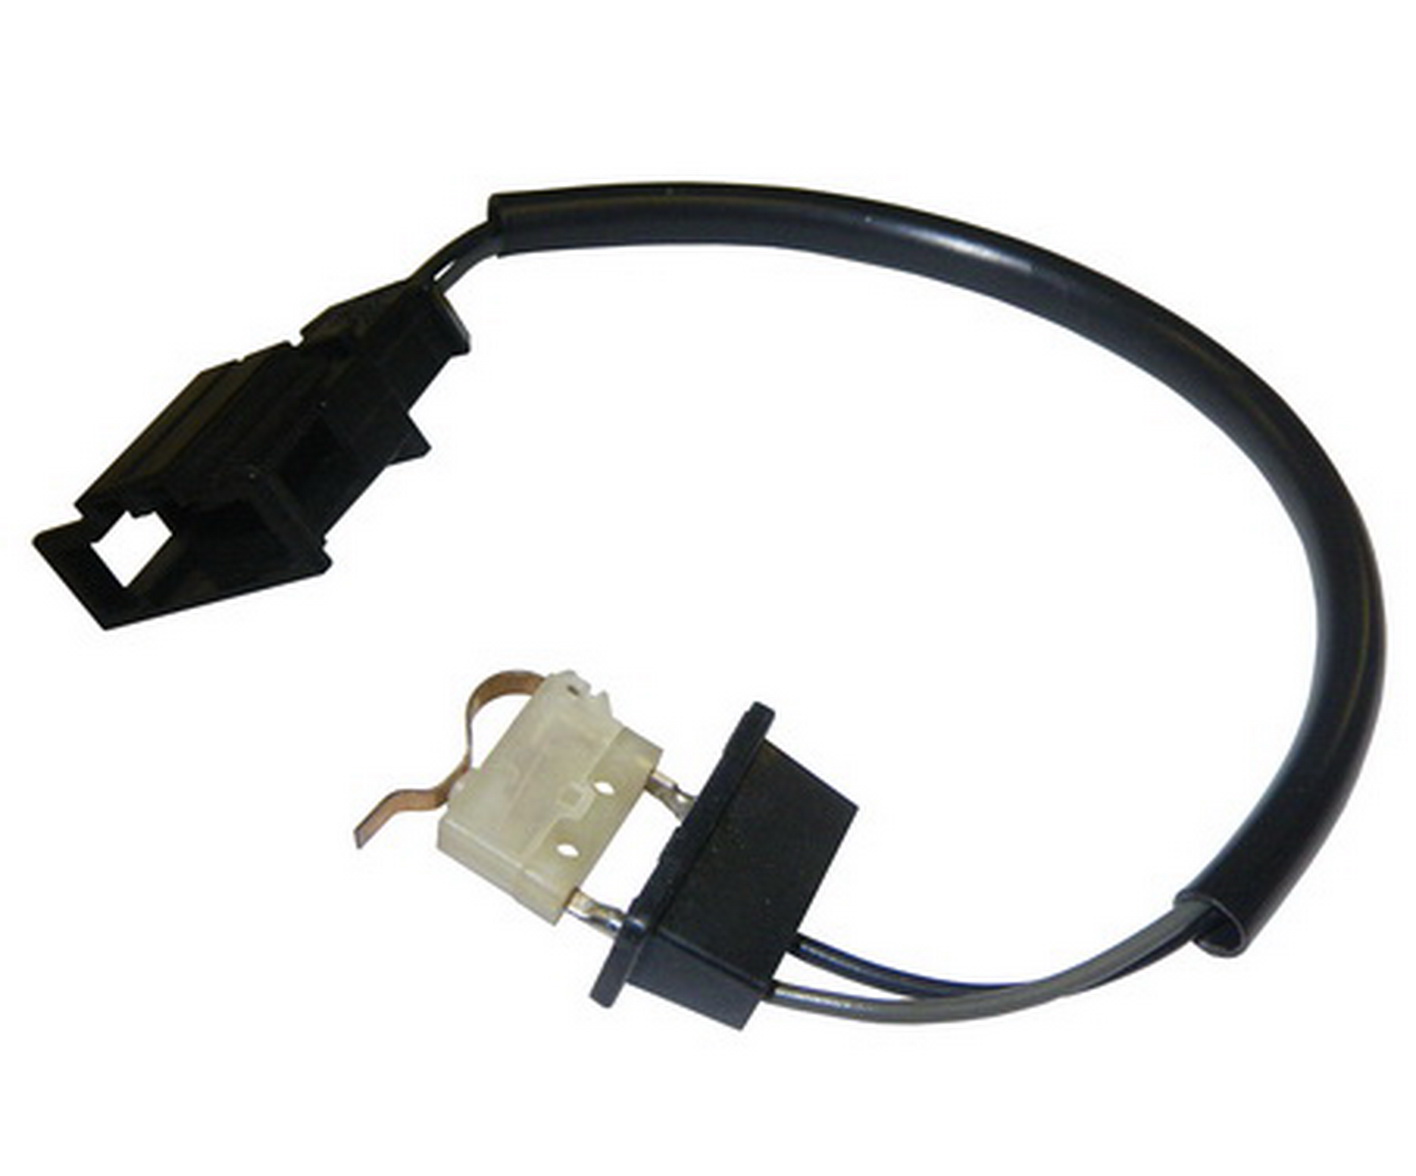 Harness with microswitch 2110-6105890, 1118-5606820, 2123-6105824, 1119-6305820, 2171-6305820